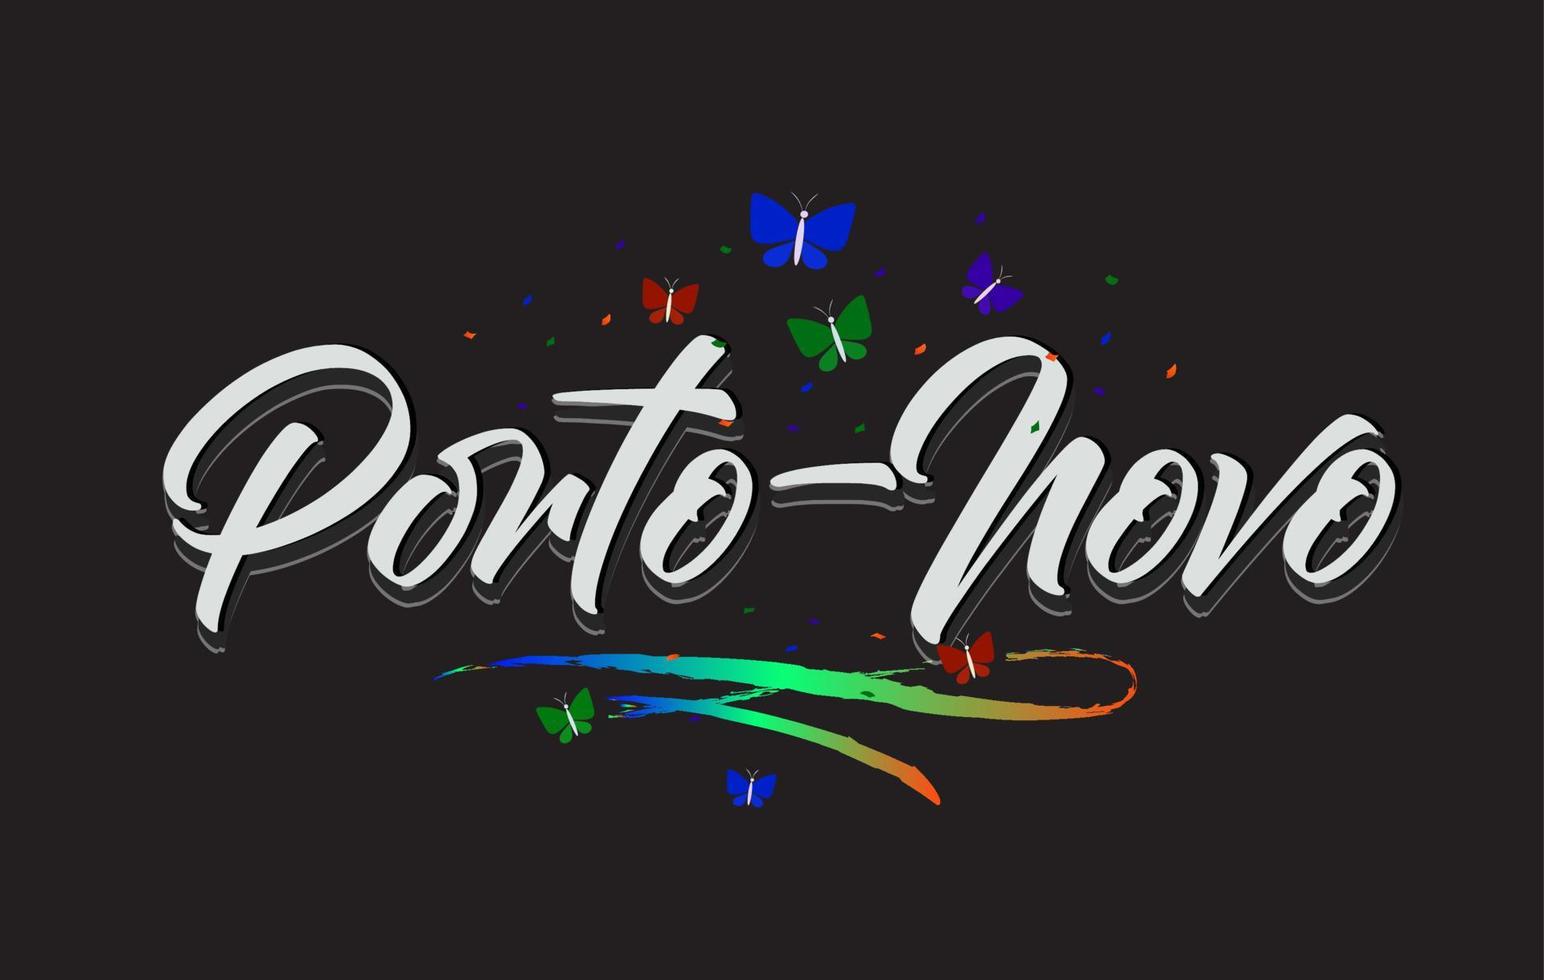 White Porto-Novo Handwritten Vector Word Text with Butterflies and Colorful Swoosh.